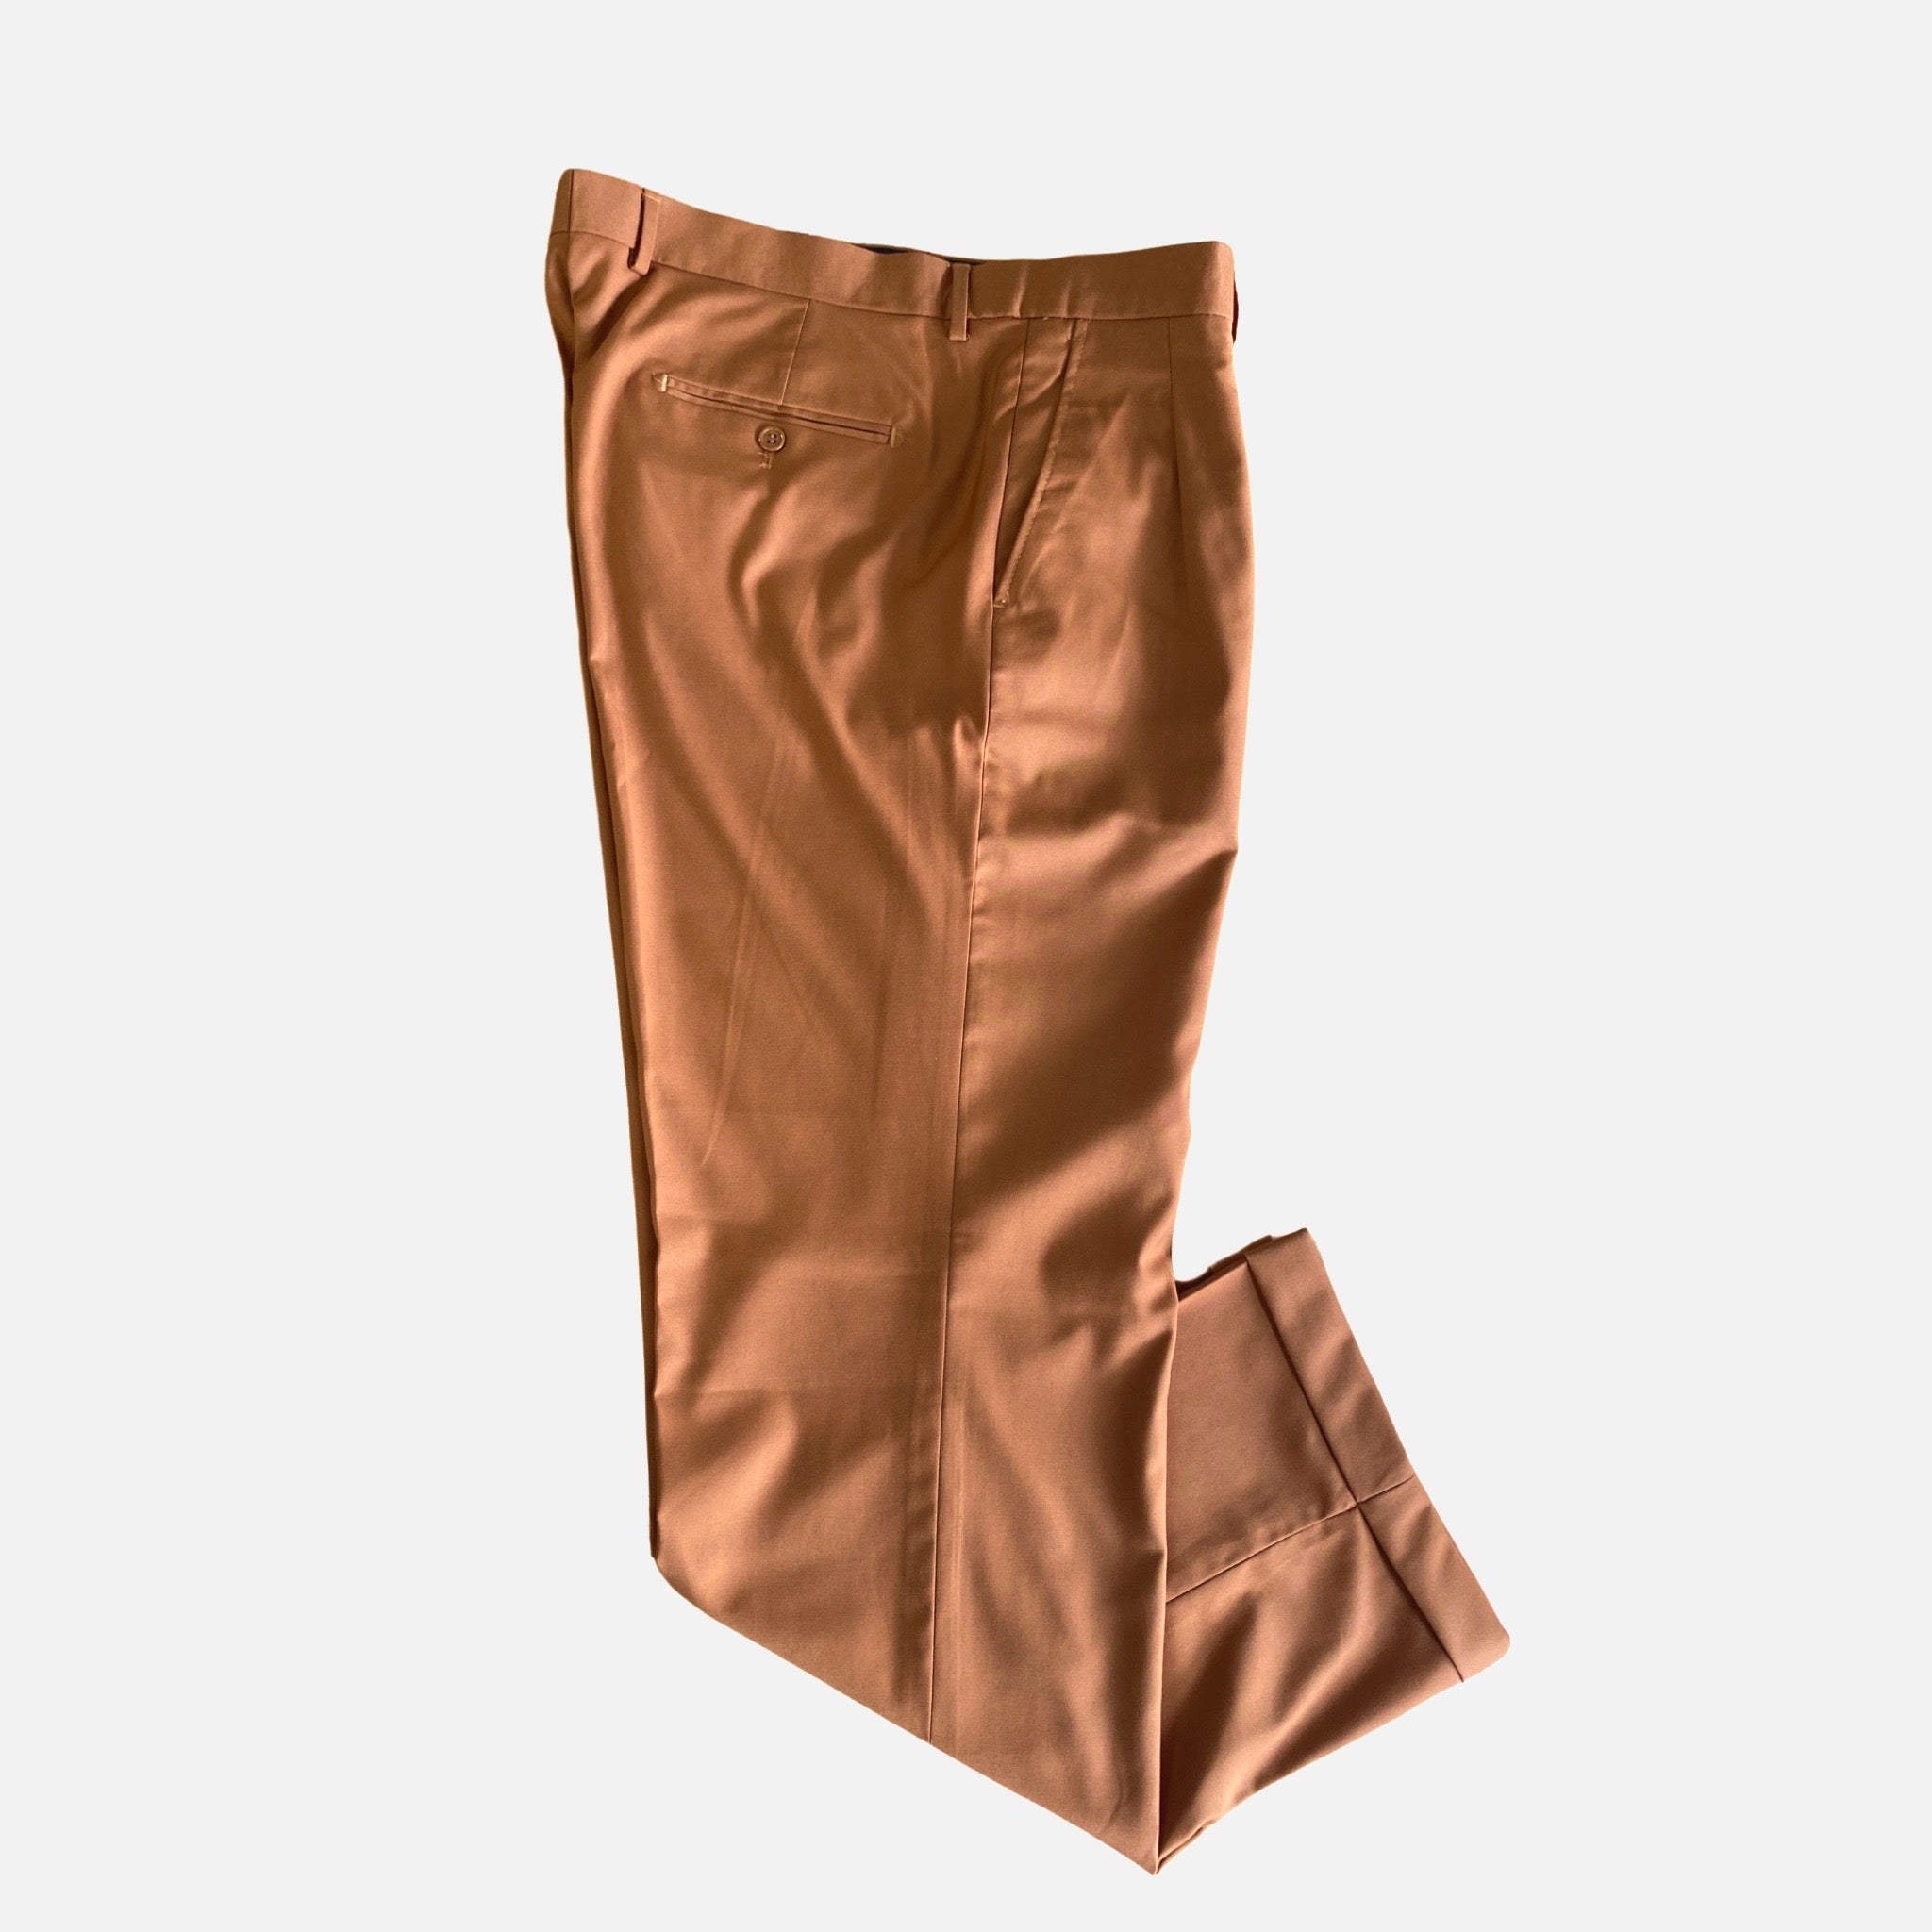 Clearance Sale: Inserch Men's Two-Pleat Pants - Caramel - Now Only $49.99!